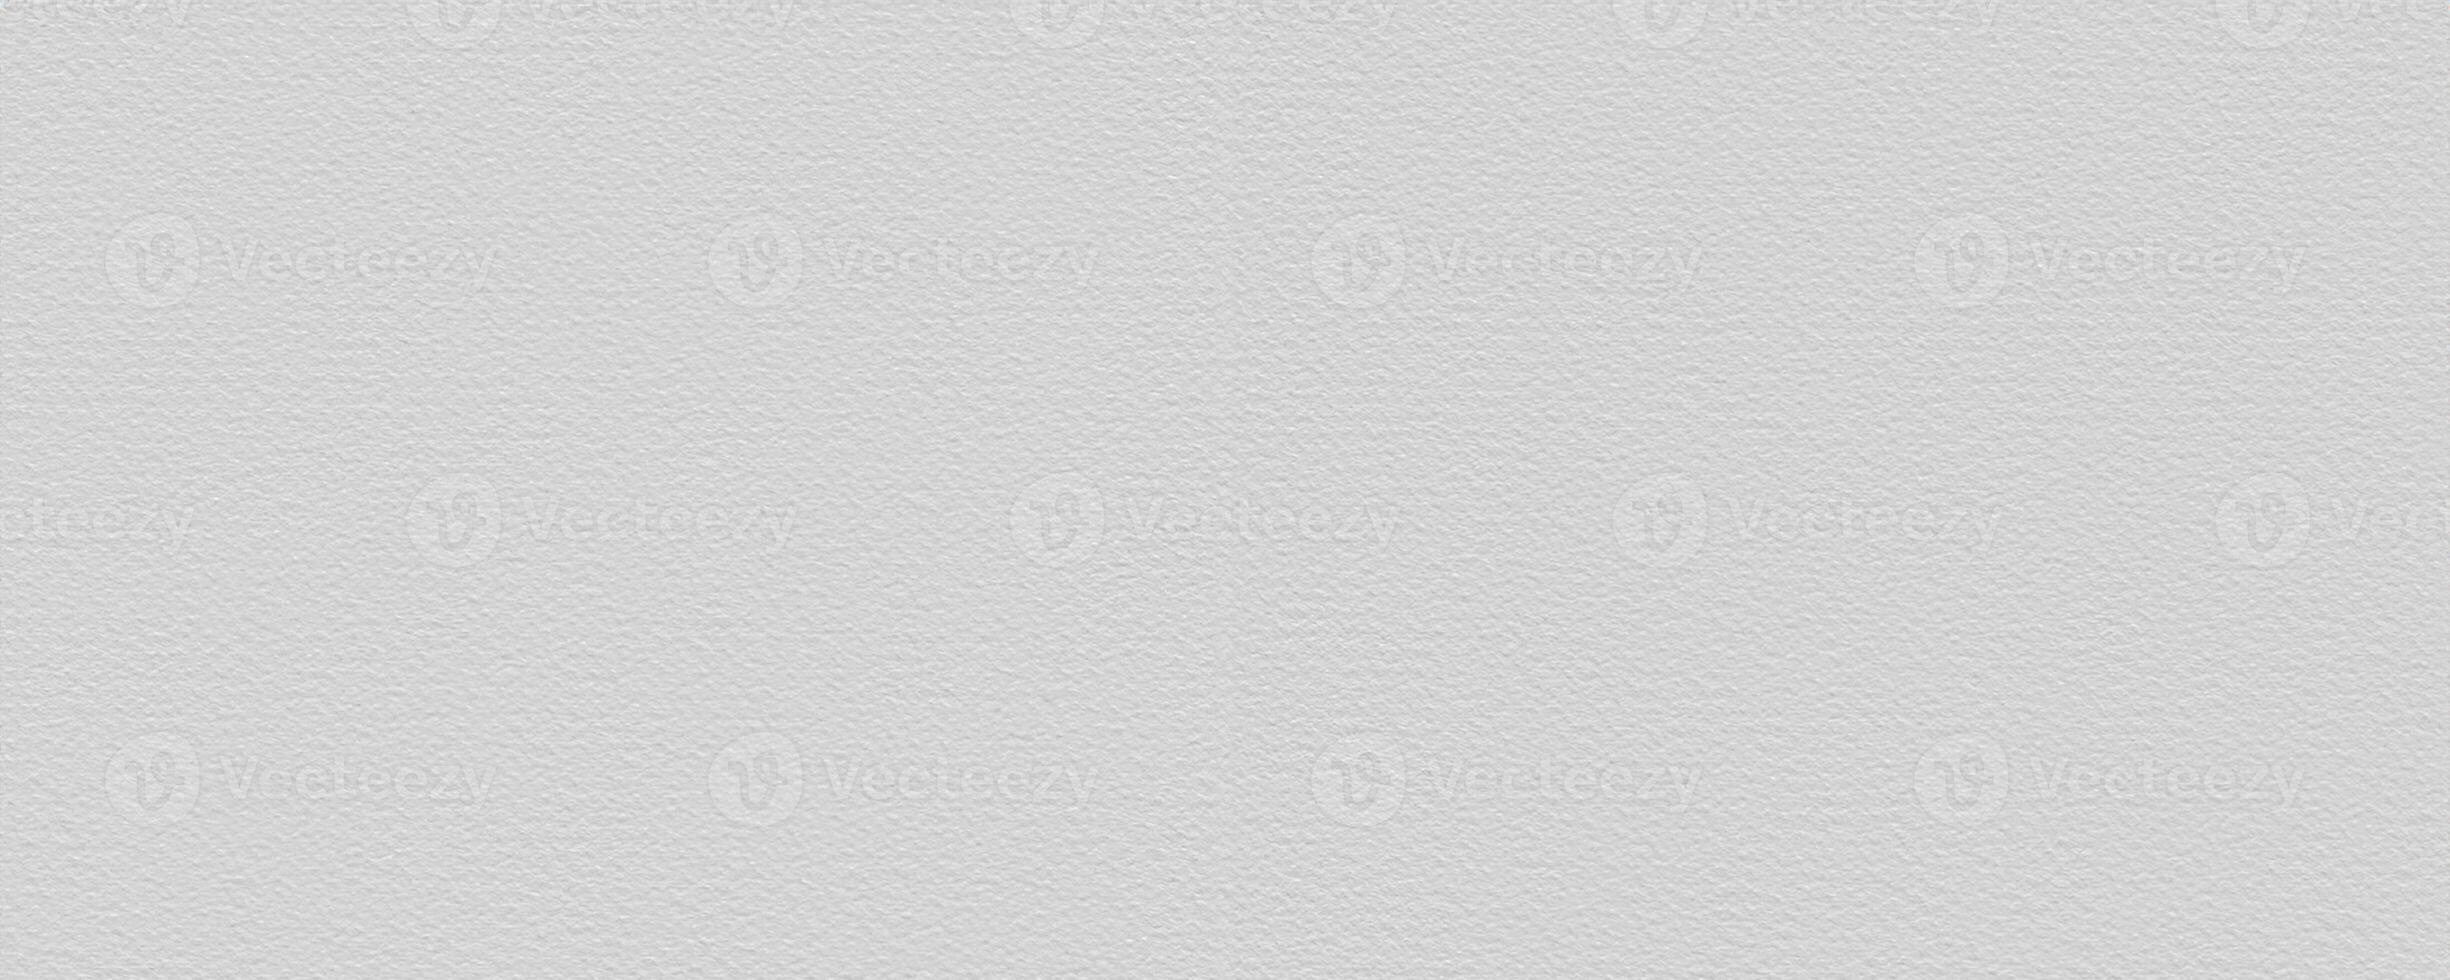 White watercolor paper texture background photo